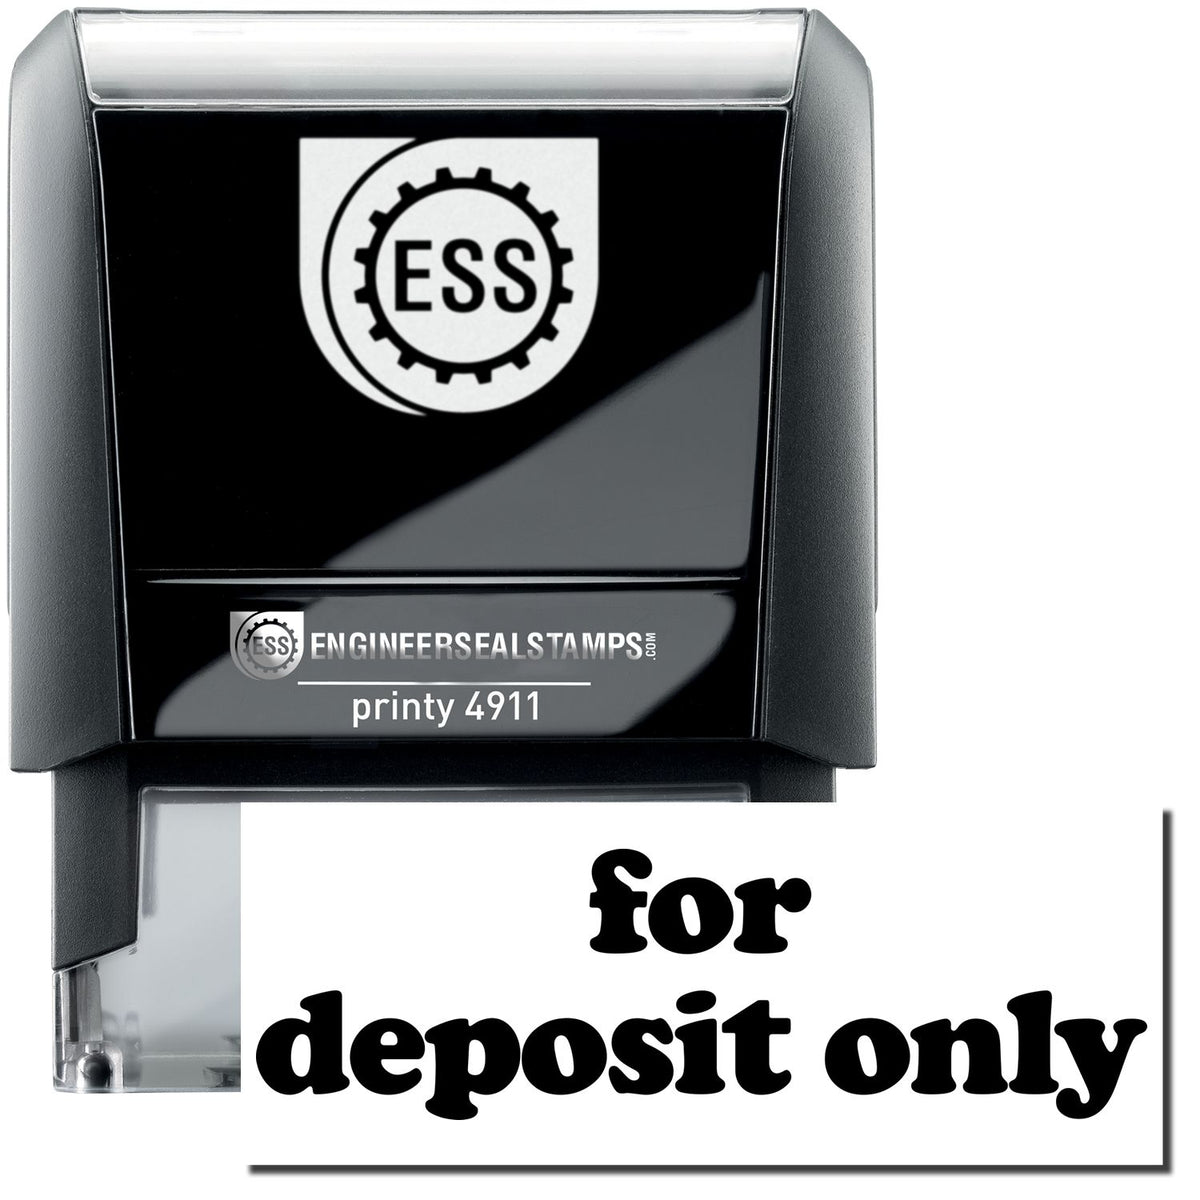 A self-inking stamp with a stamped image showing how the text &quot;for deposit only&quot; in lowercase letters is displayed after stamping.